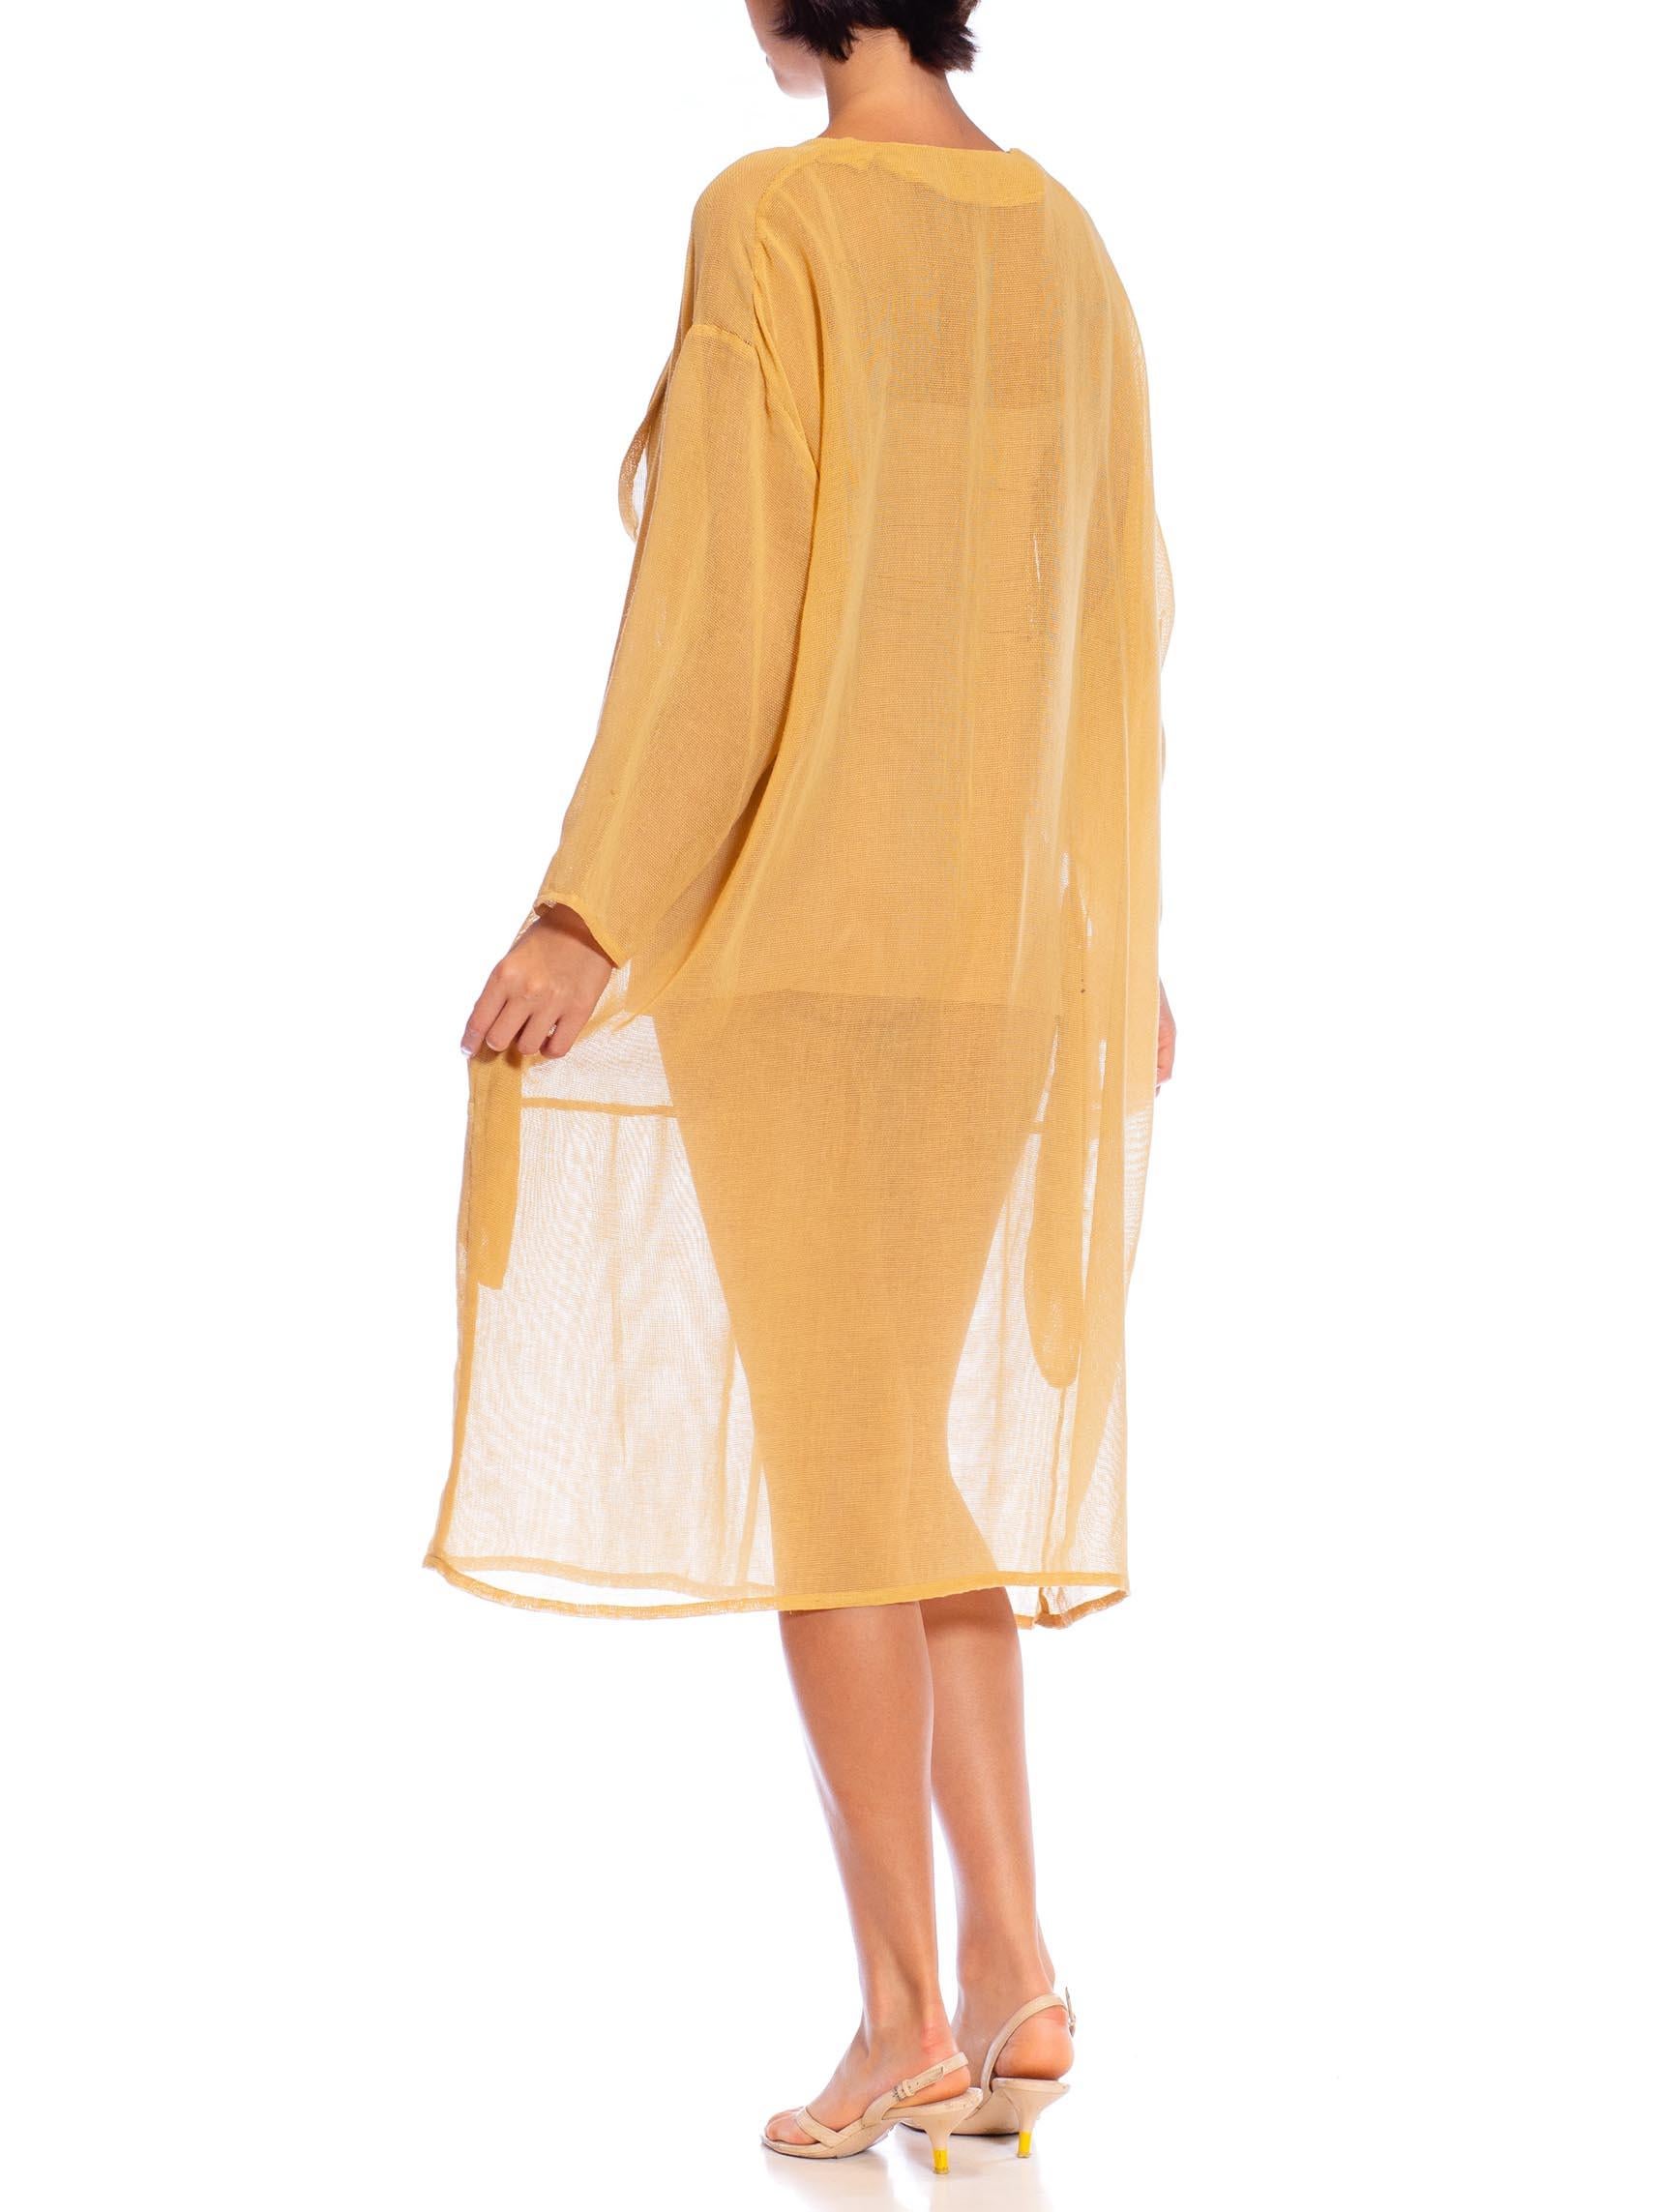 MORPHEW COLLECTION Mustard Yellow Cotton Blend Gauze Unisex Cowl-Neck Tunic Top For Sale 1